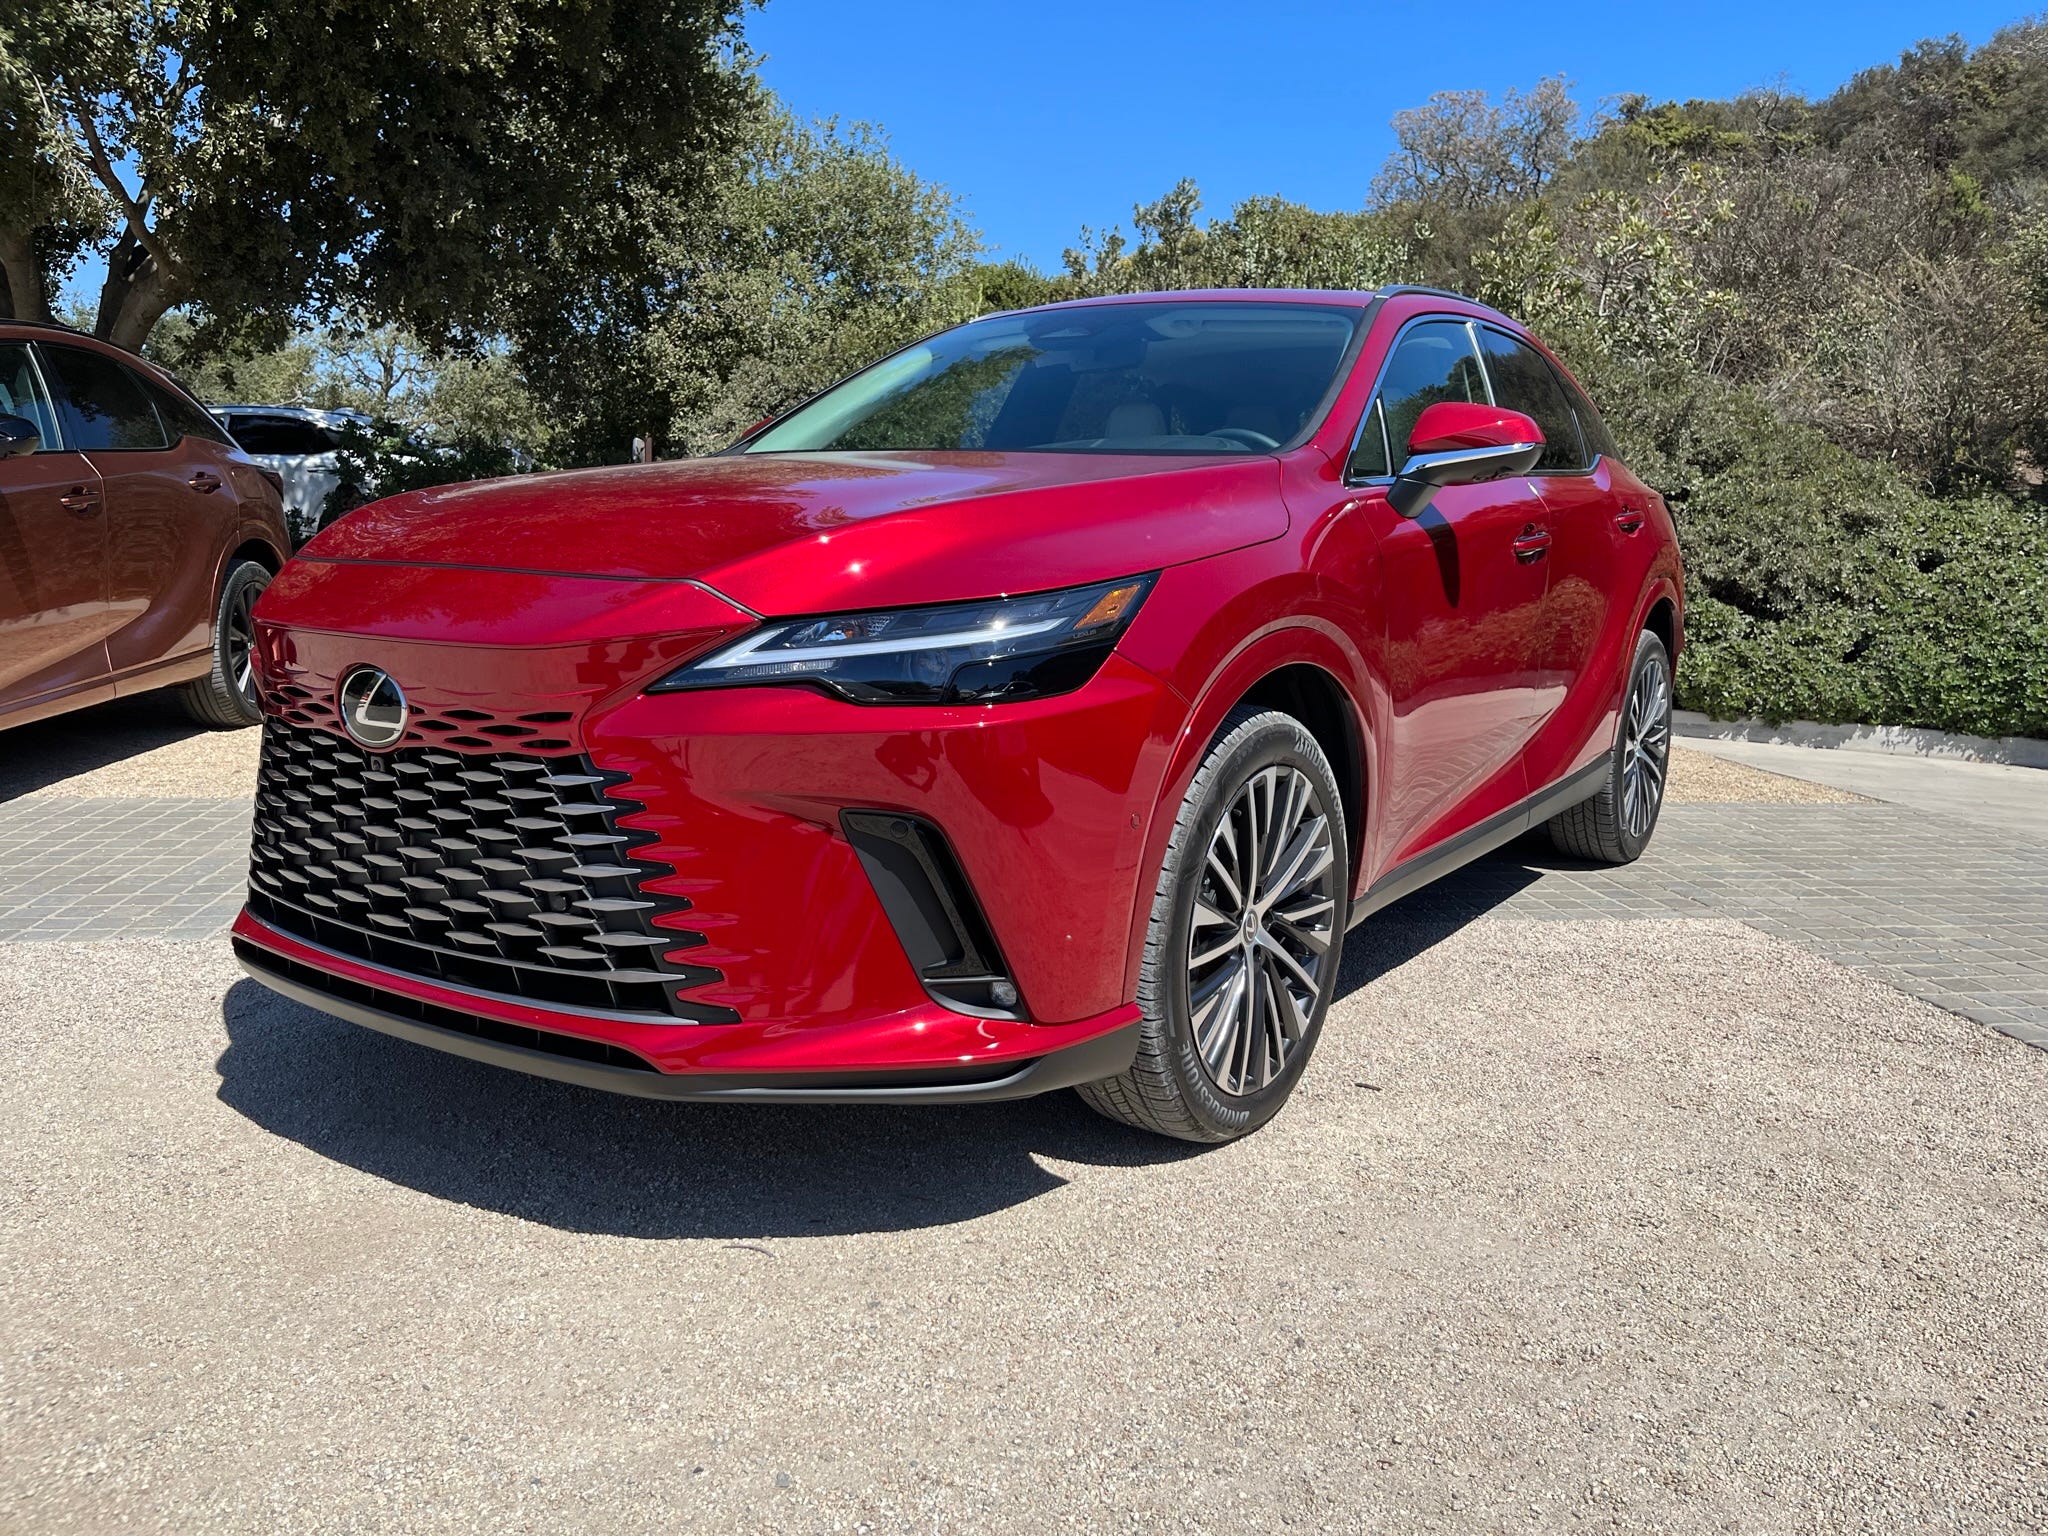 2023 Lexus RX SUV has advanced tech, luxury, and one annoying feature